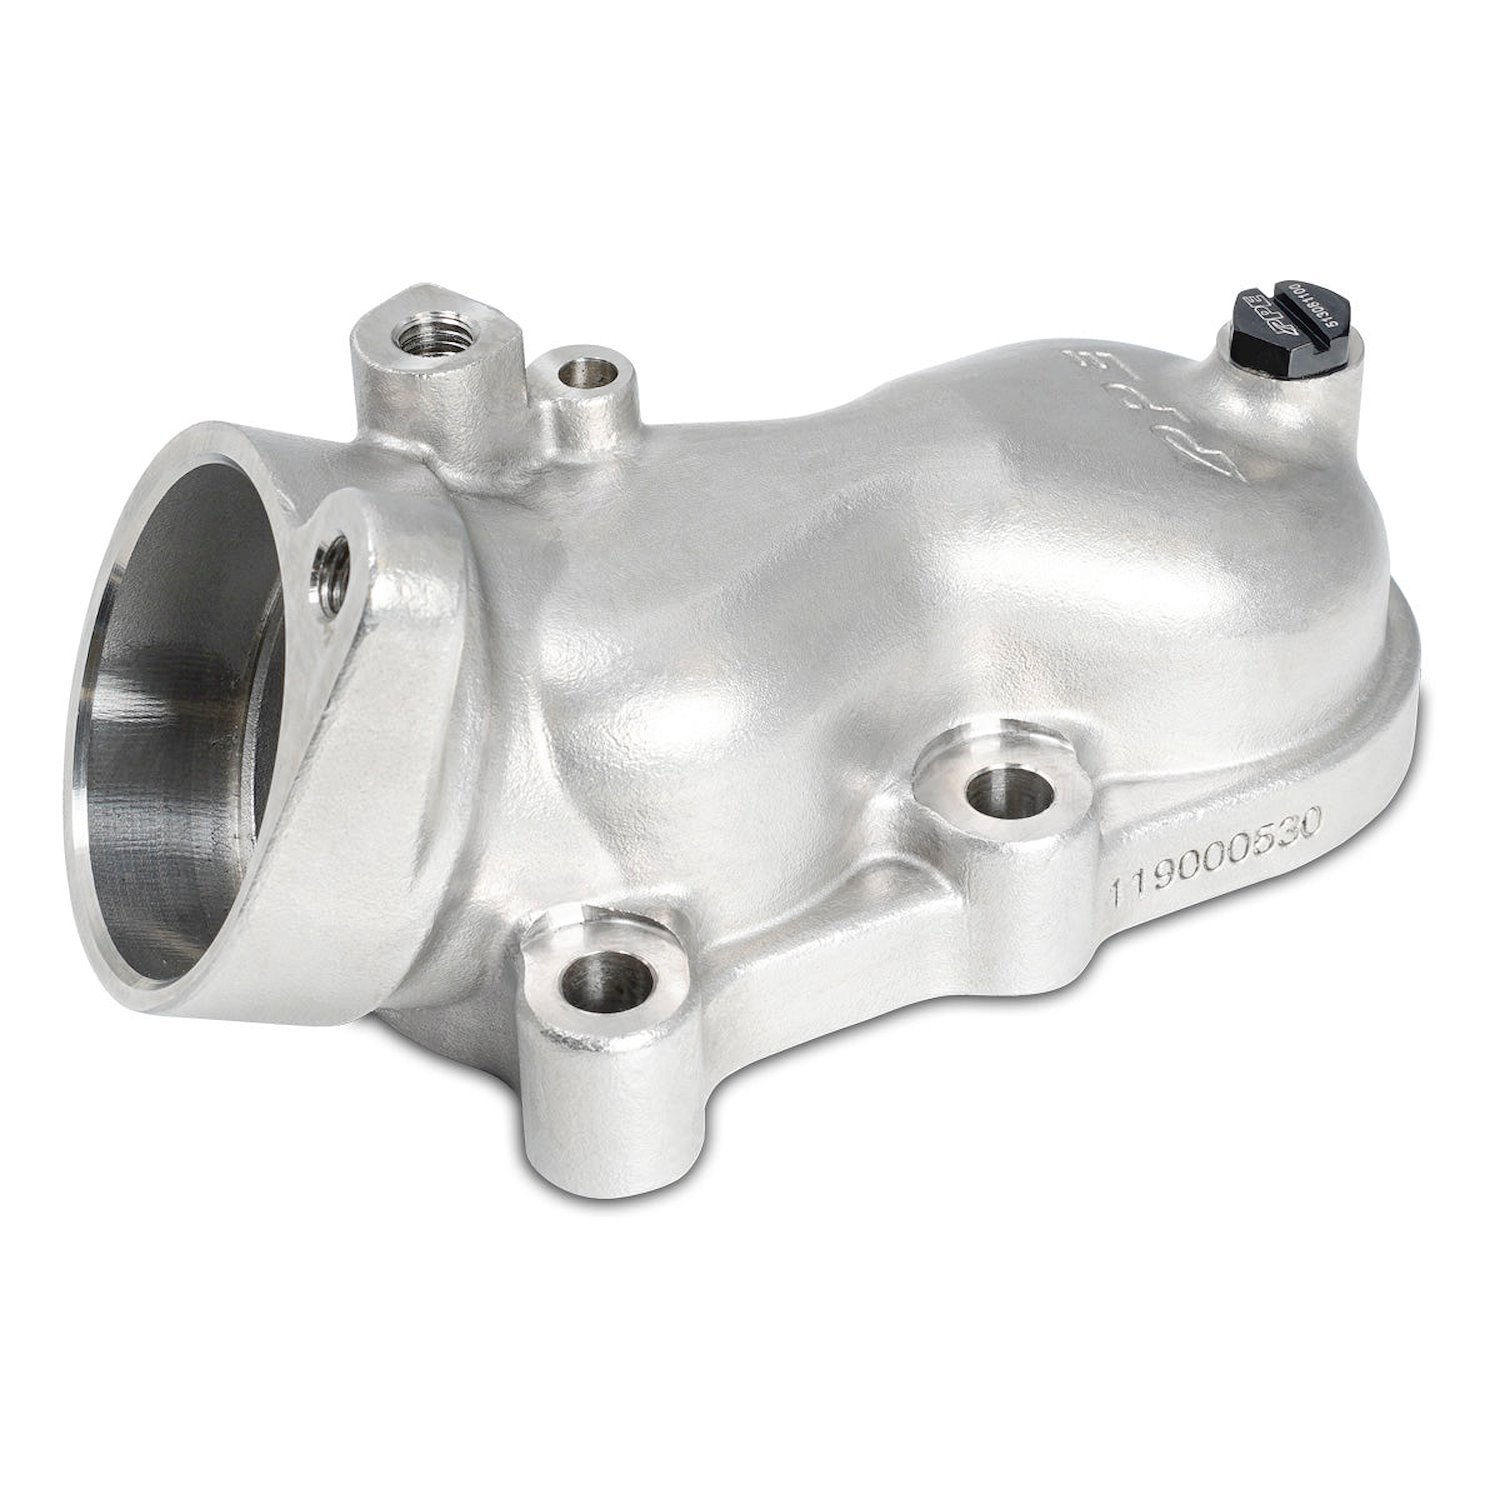 119000533 Thermostat Housing Cover - LB7 - Polished